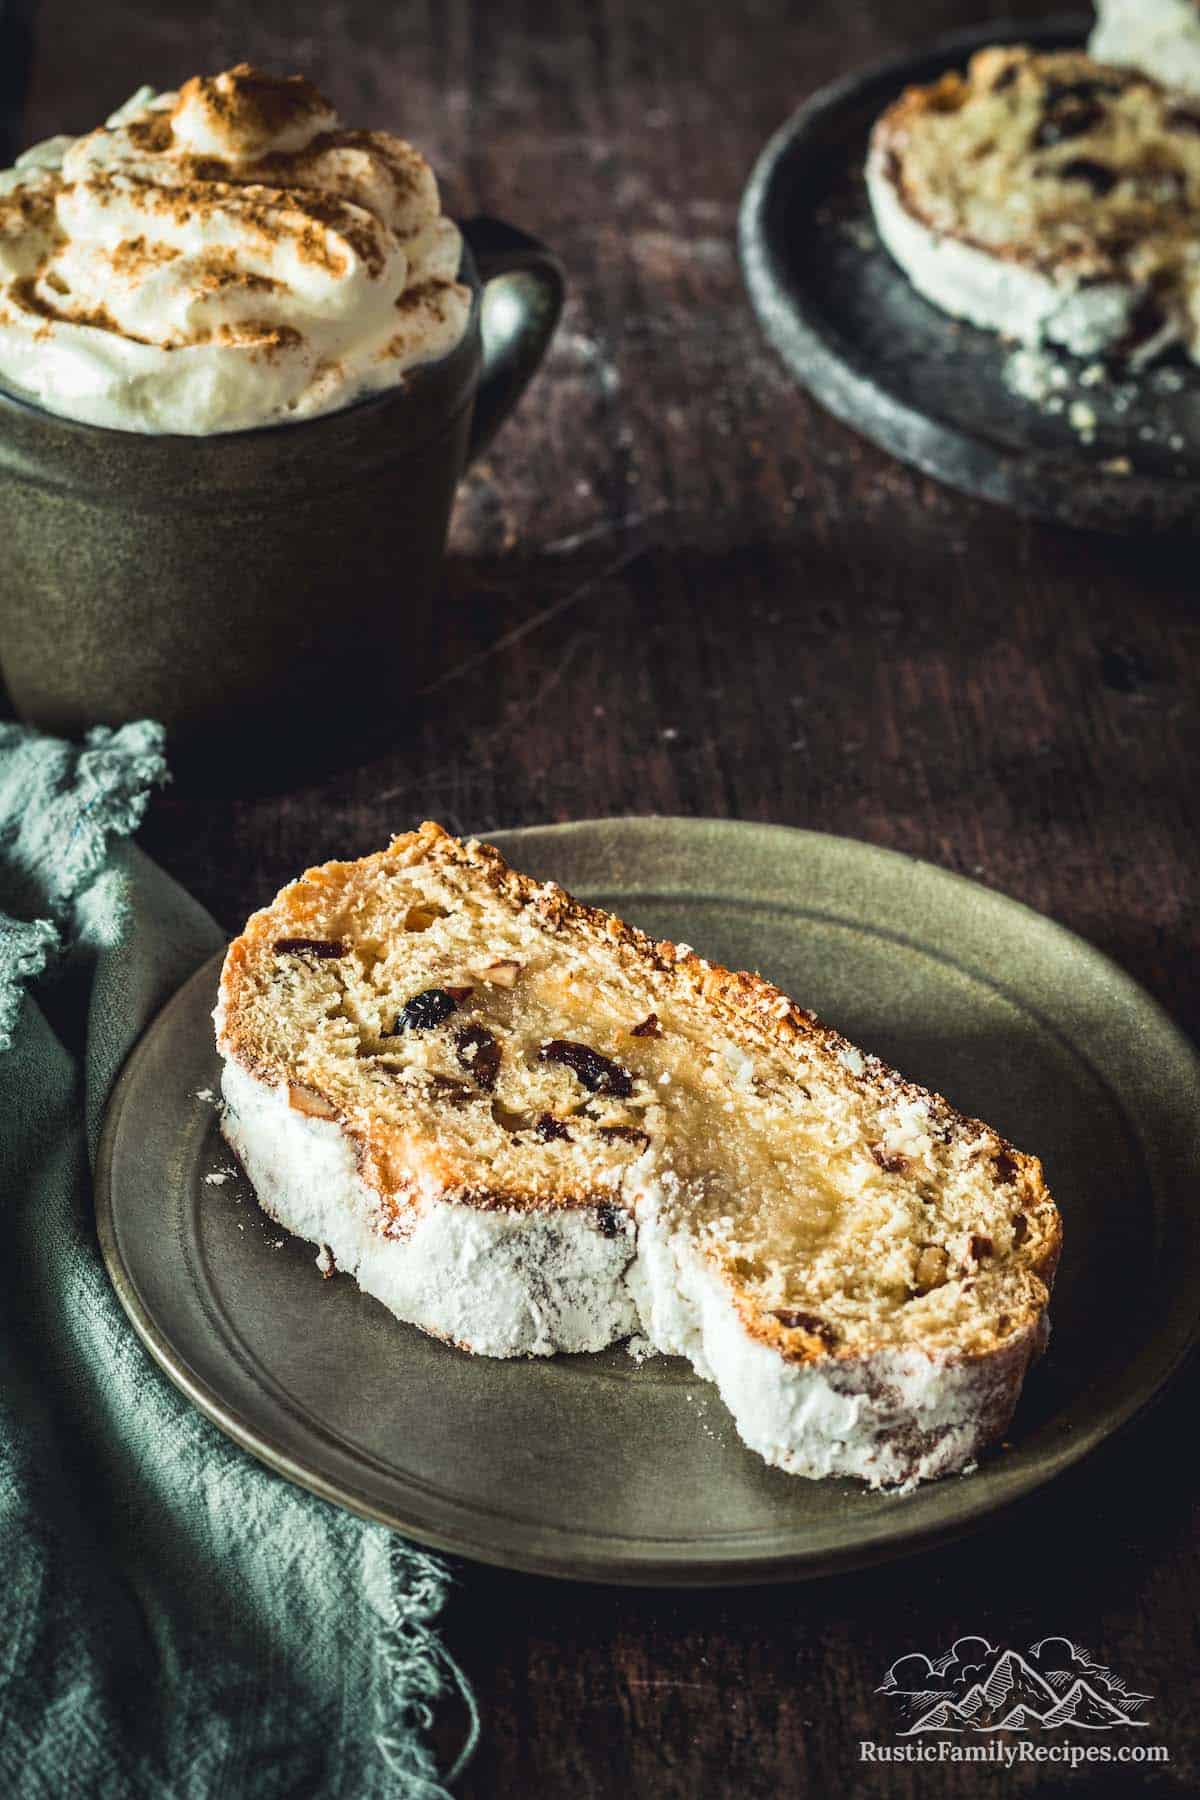 A slice of stollen on a rustic plate with a cup of coffee in the background